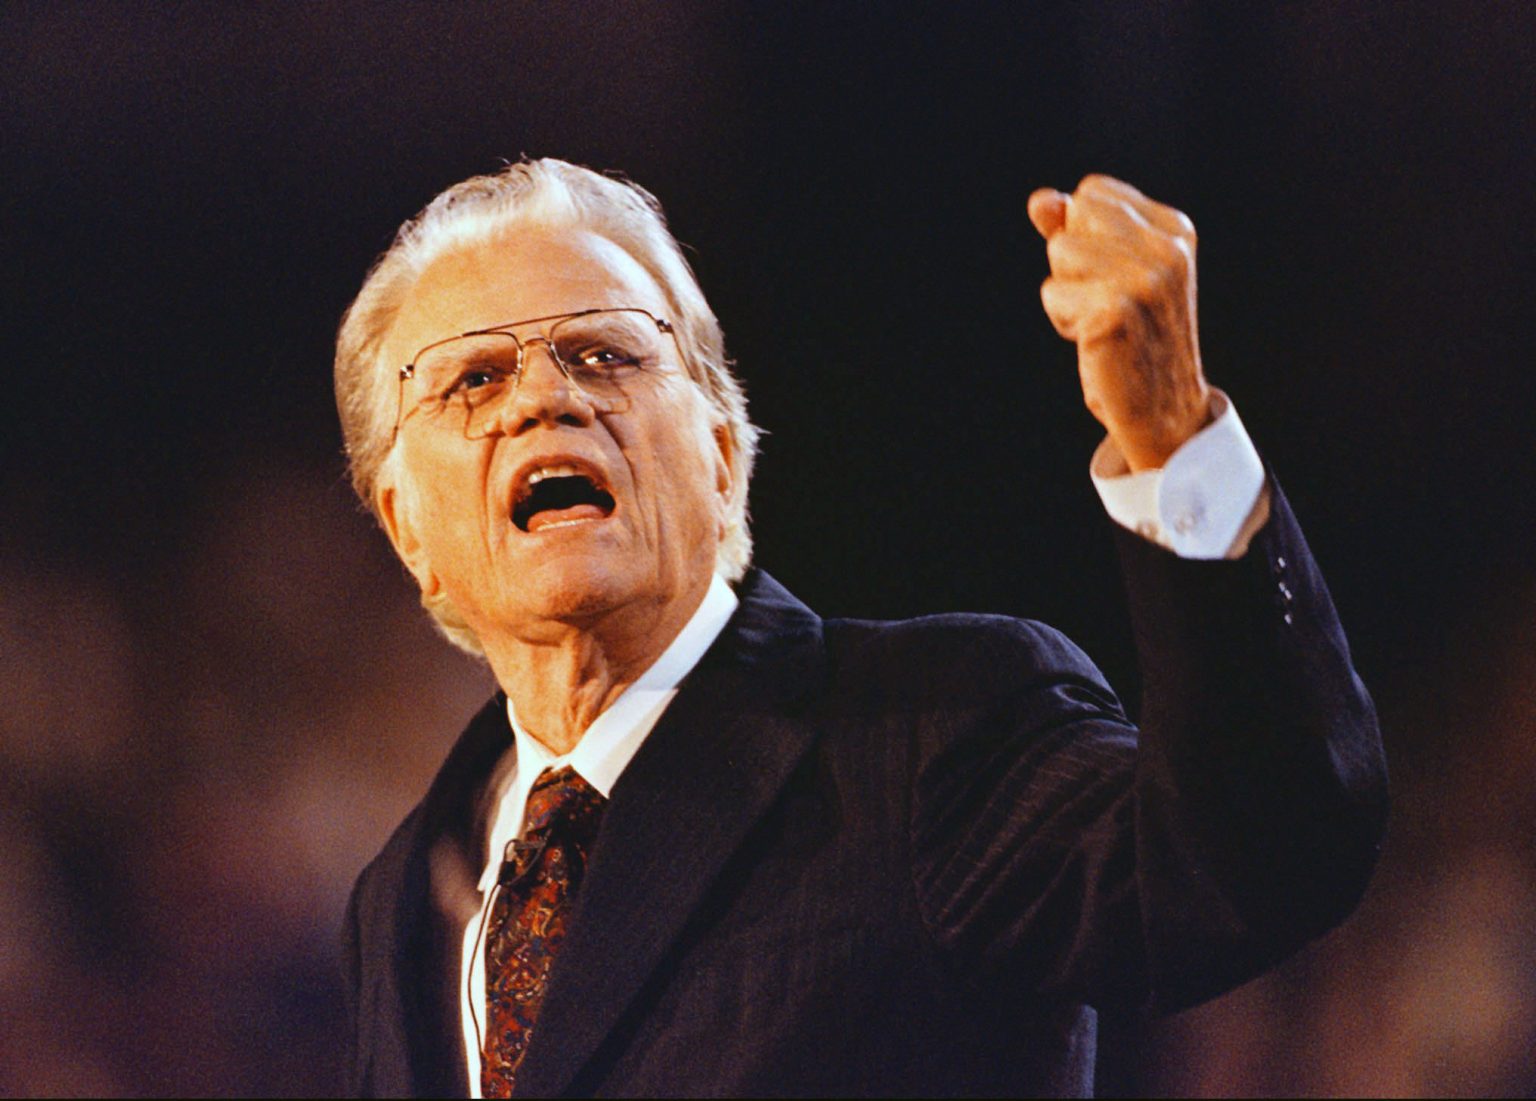 DOWNLOAD MP3: The Family by Evangelist BILLY GRAHAM (Sermon) 17